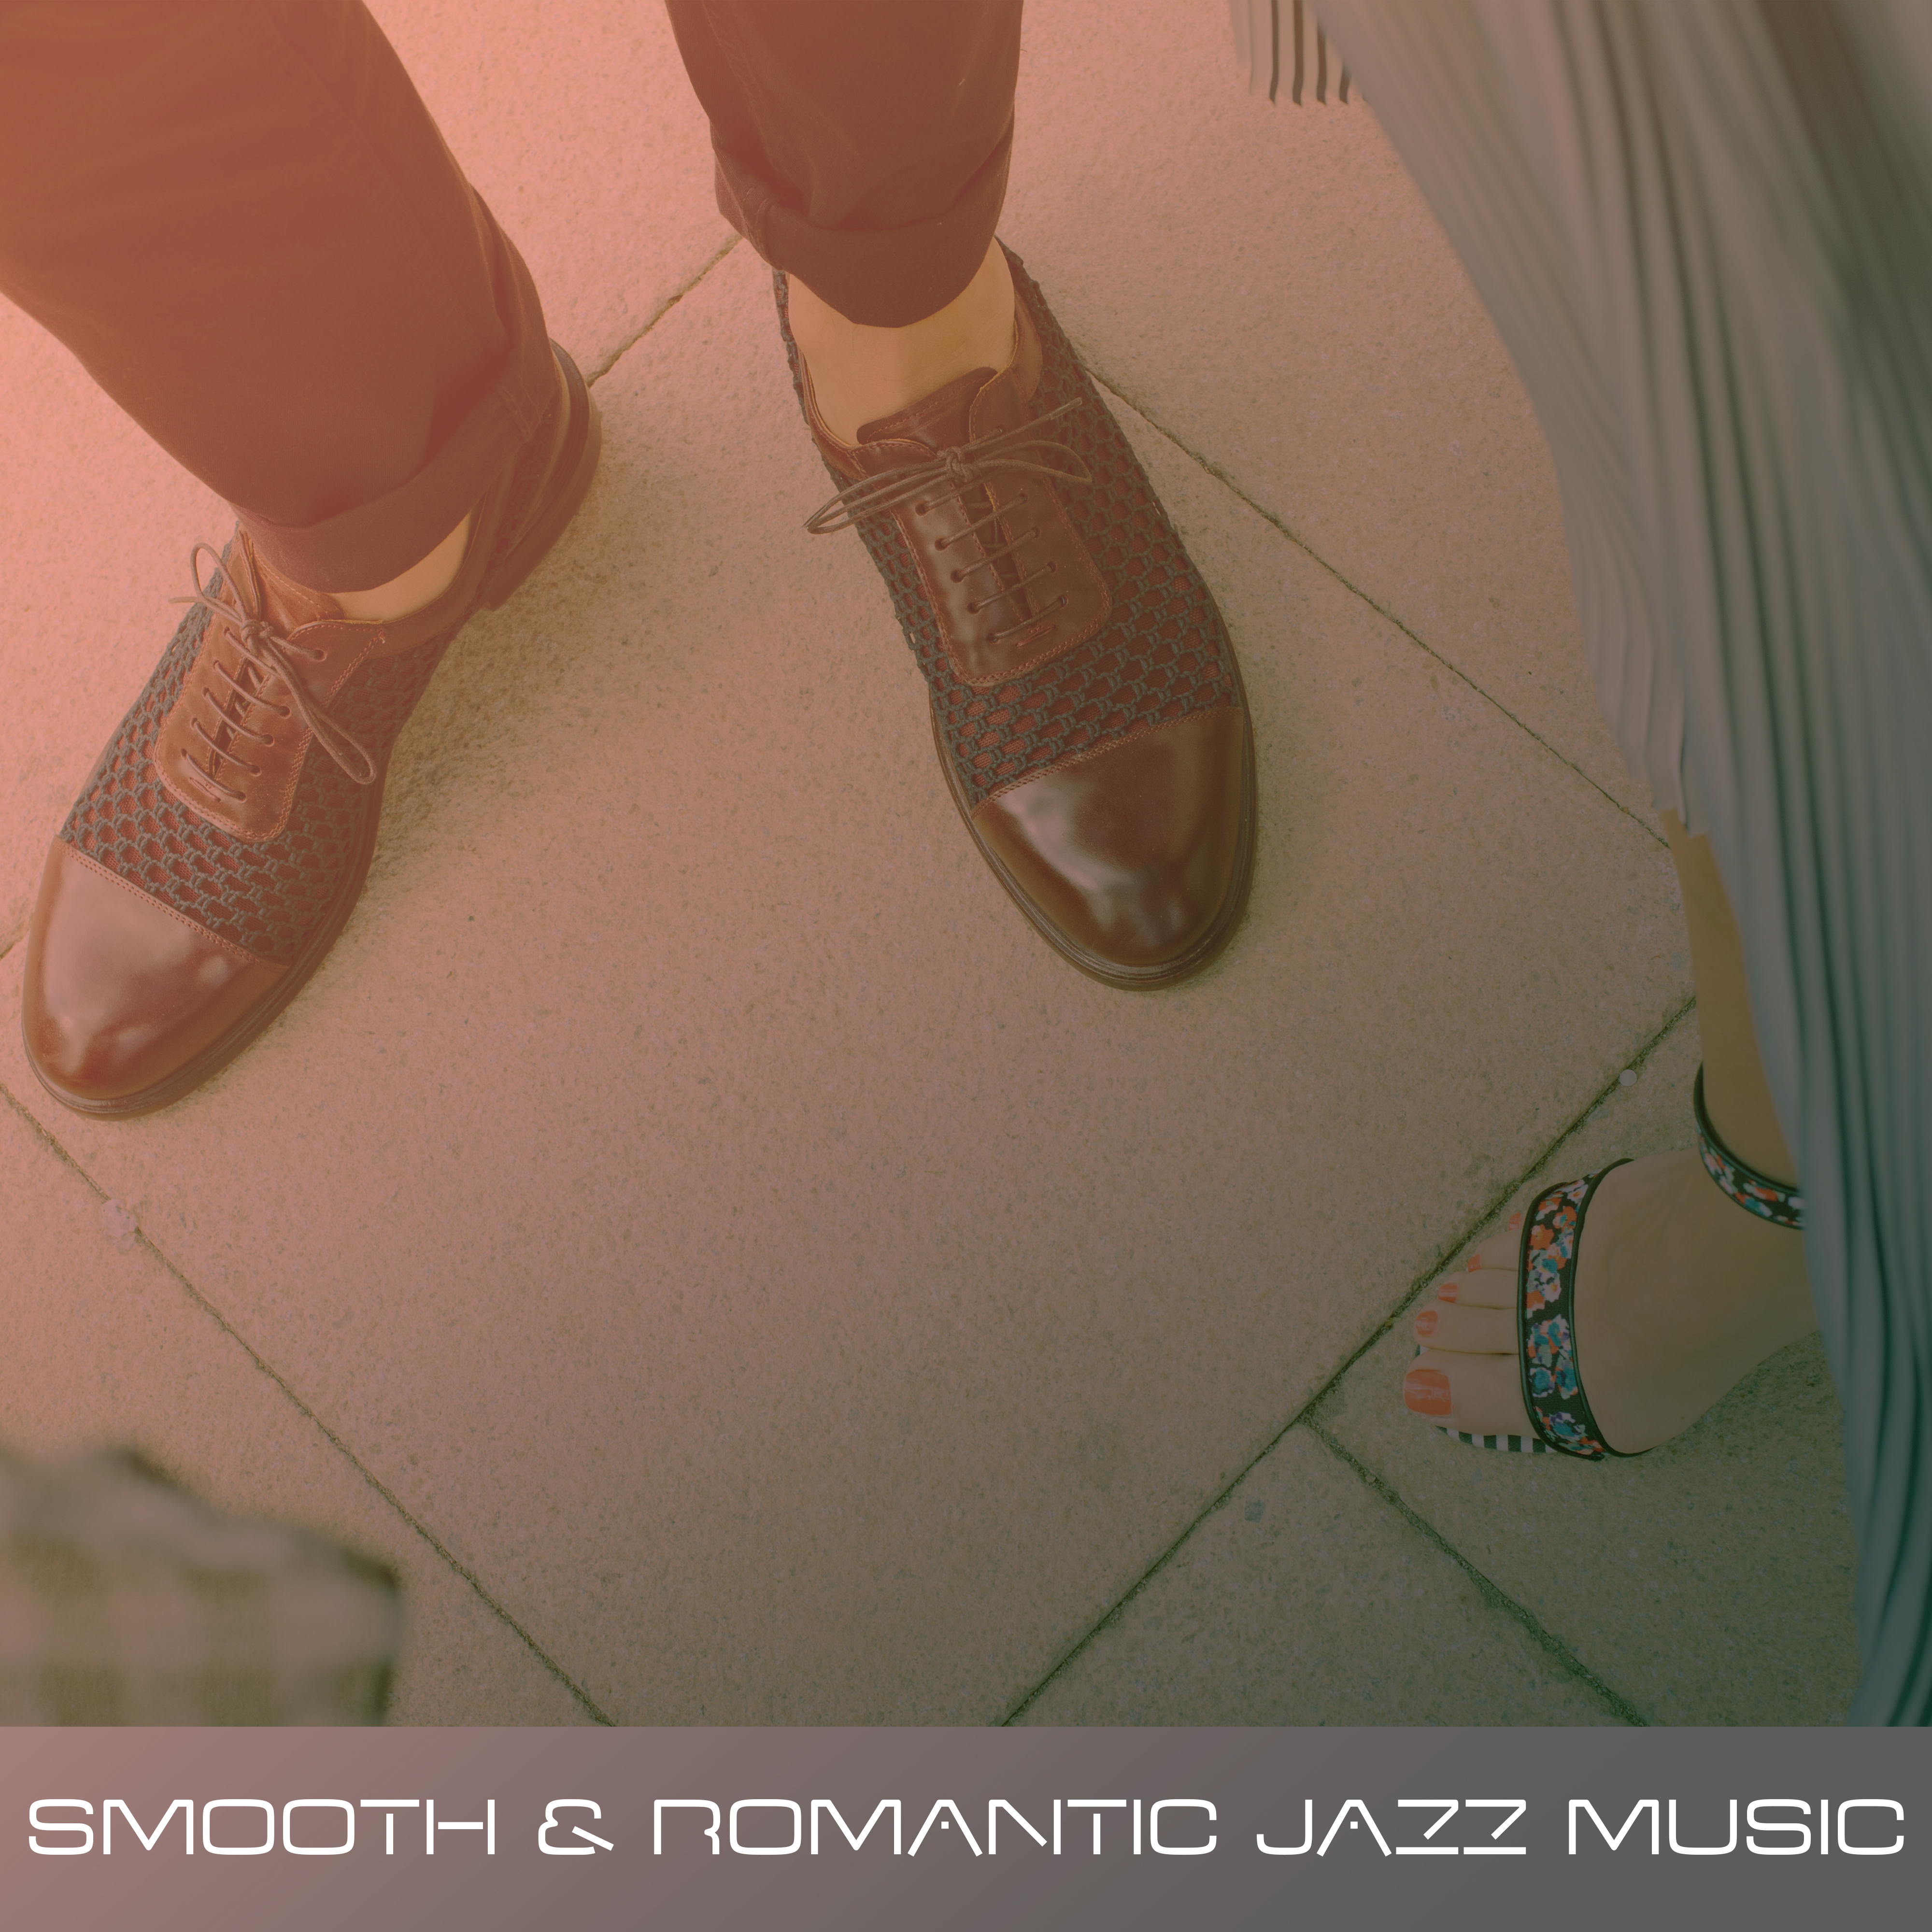 Smooth  Romantic Jazz Music  Calming Sounds of Jazz, Romantic Background Music, Jazz for Lovers